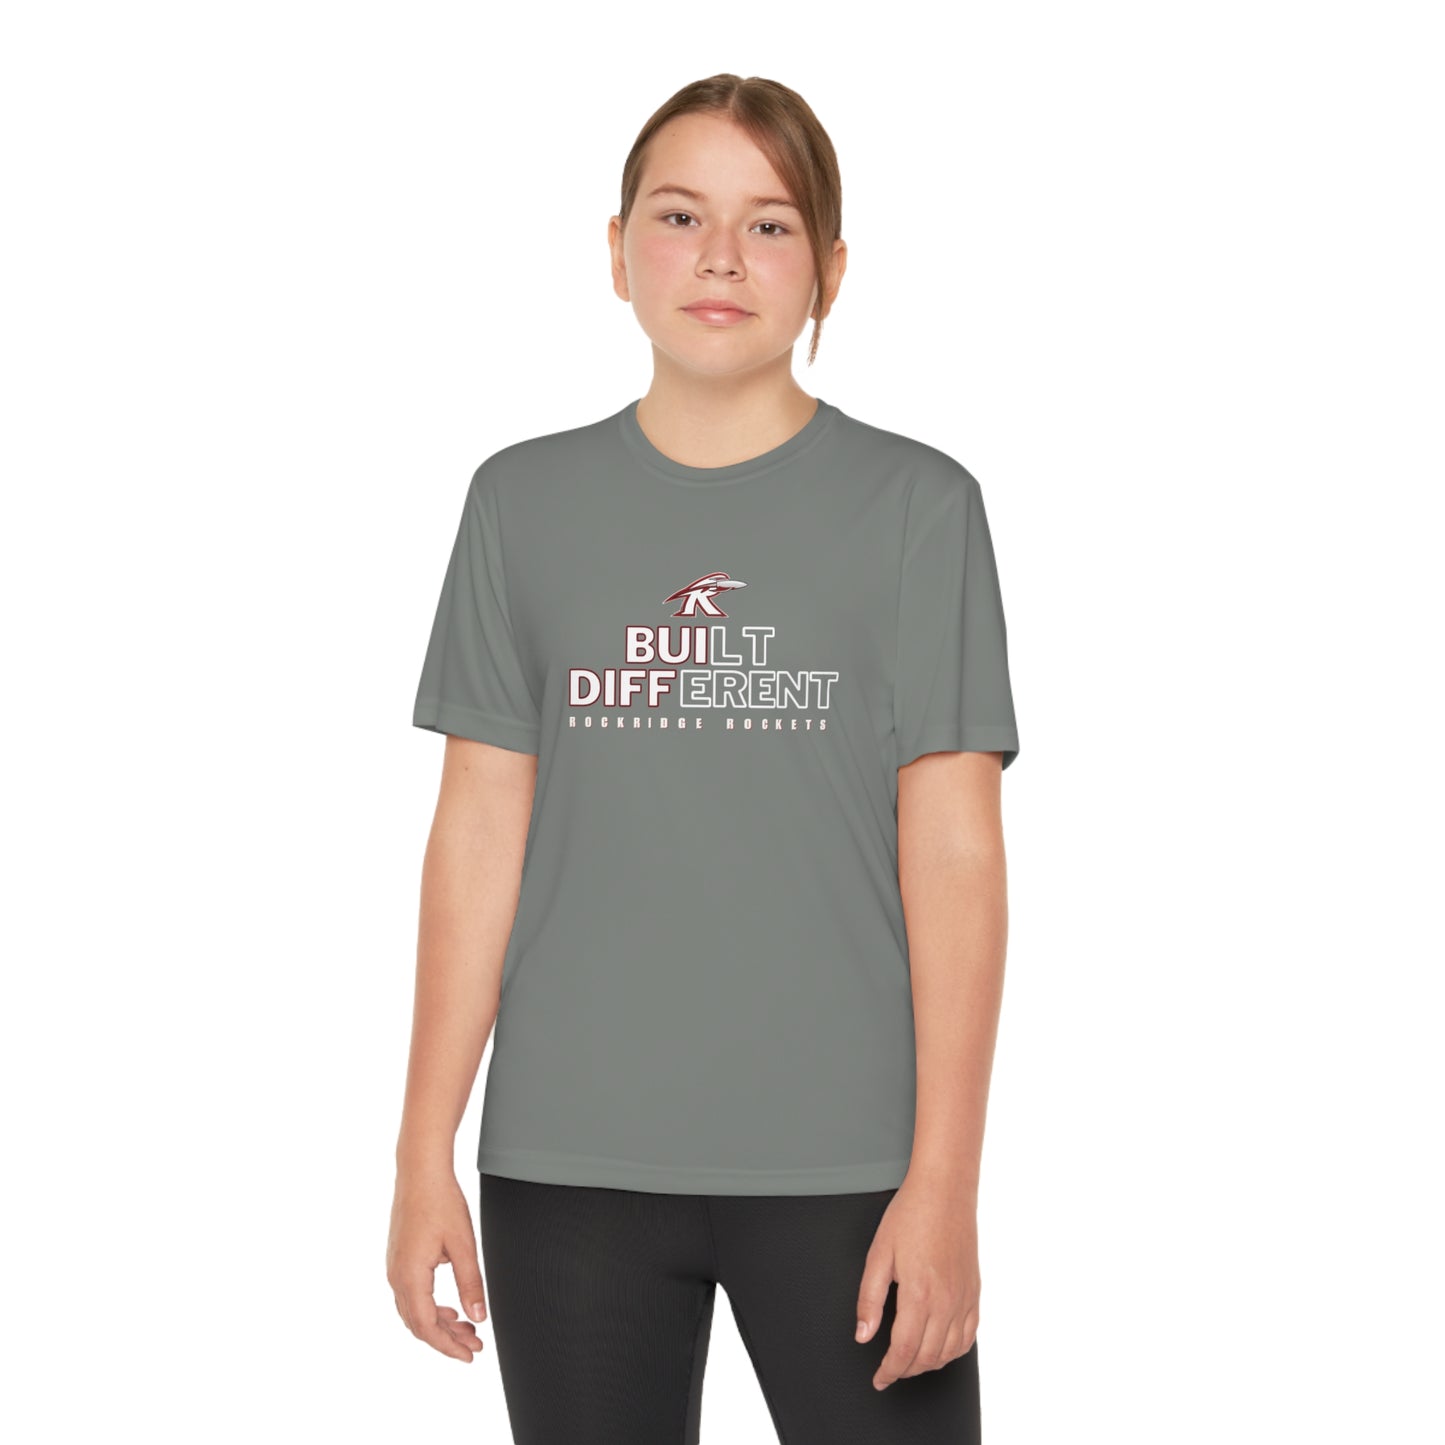 Built Different, Rockridge Rockets - Youth Competitor Tee